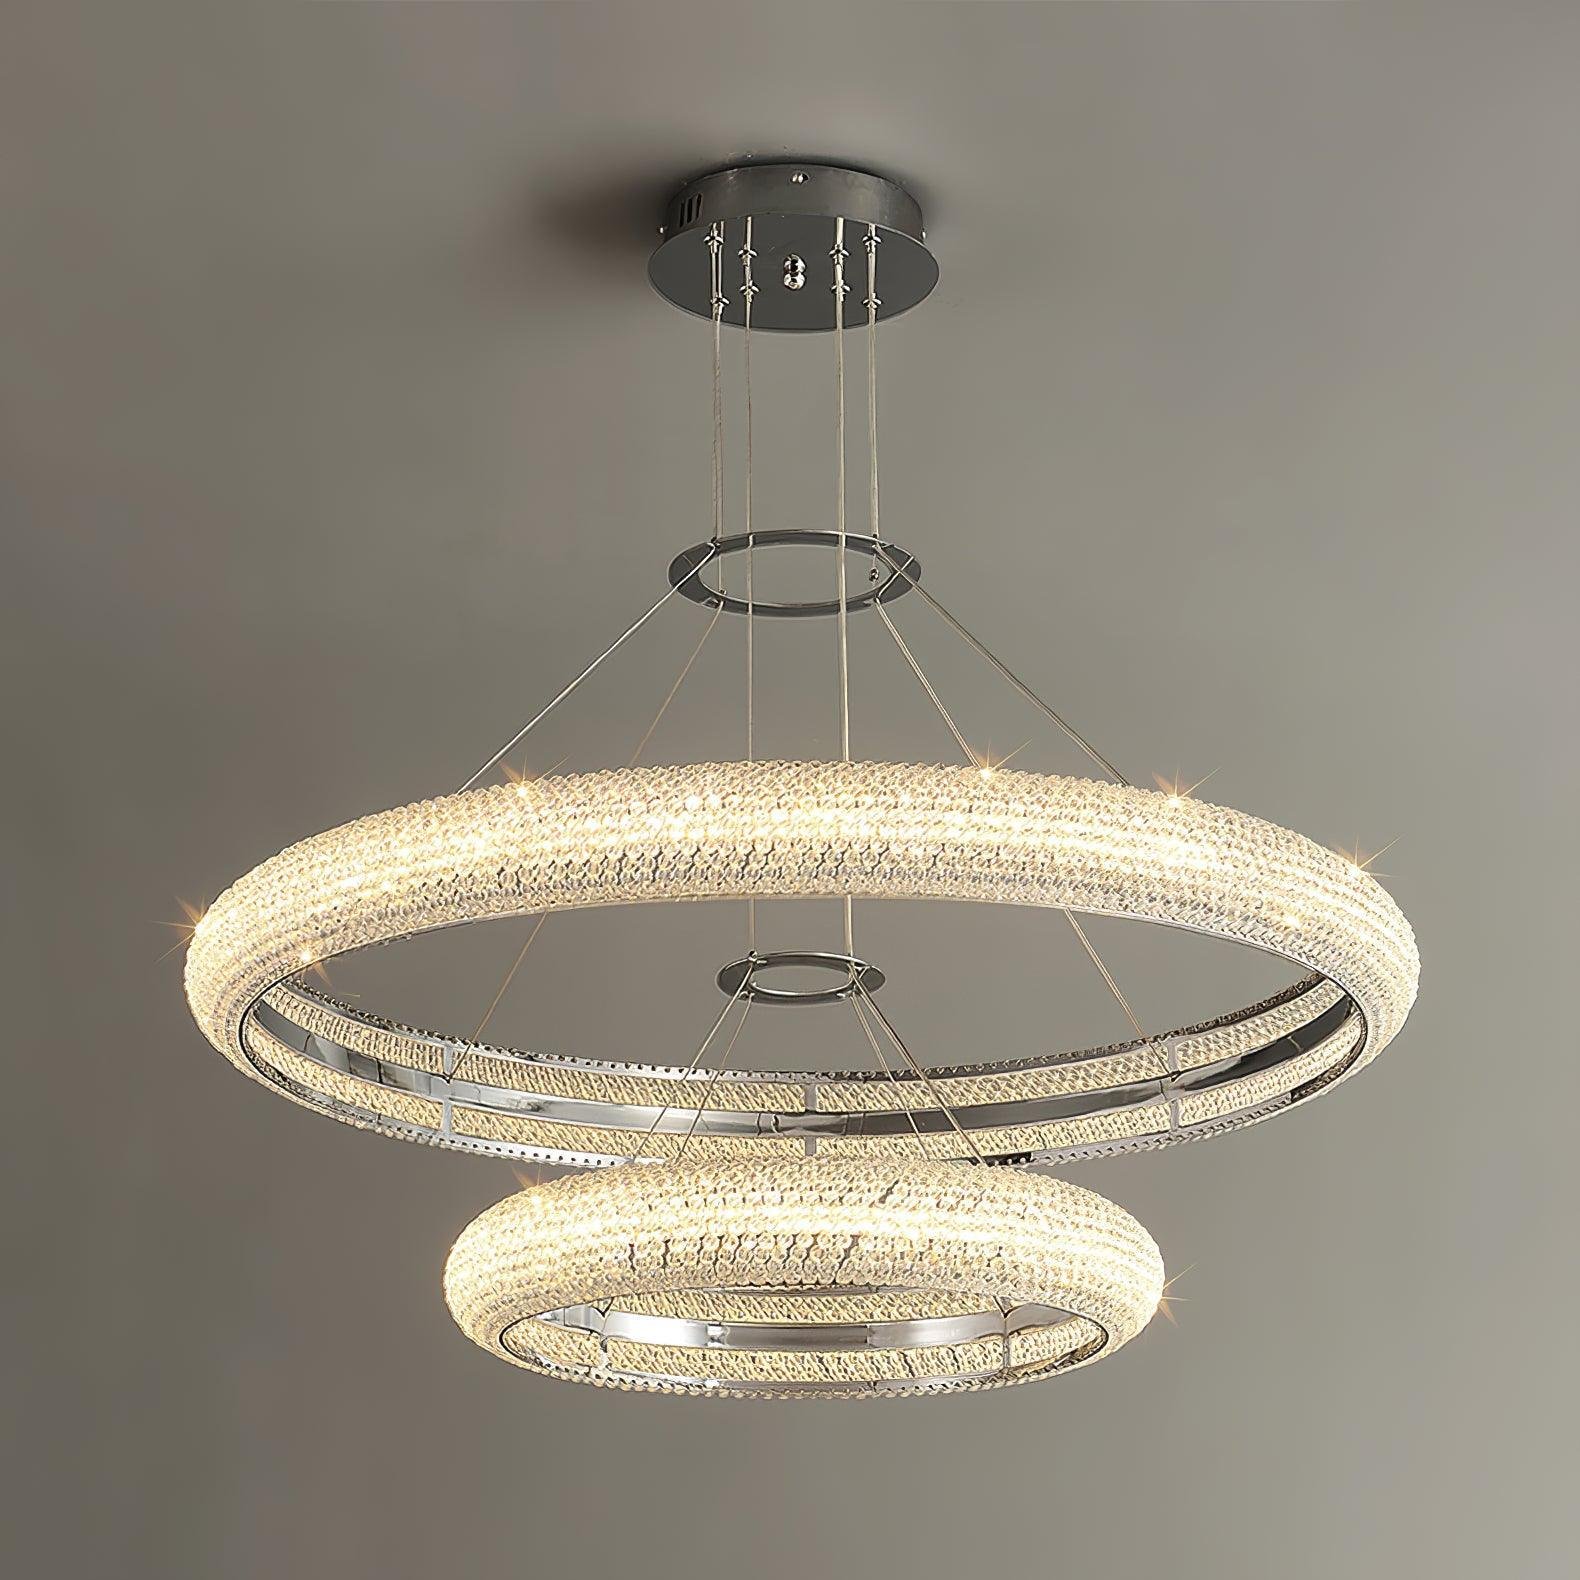 Asscher Ring Chandelier with a diameter of 17.7" and 31.5", equivalent to 45cm and 80cm respectively, featuring a chrome finish and emitting cool white light.